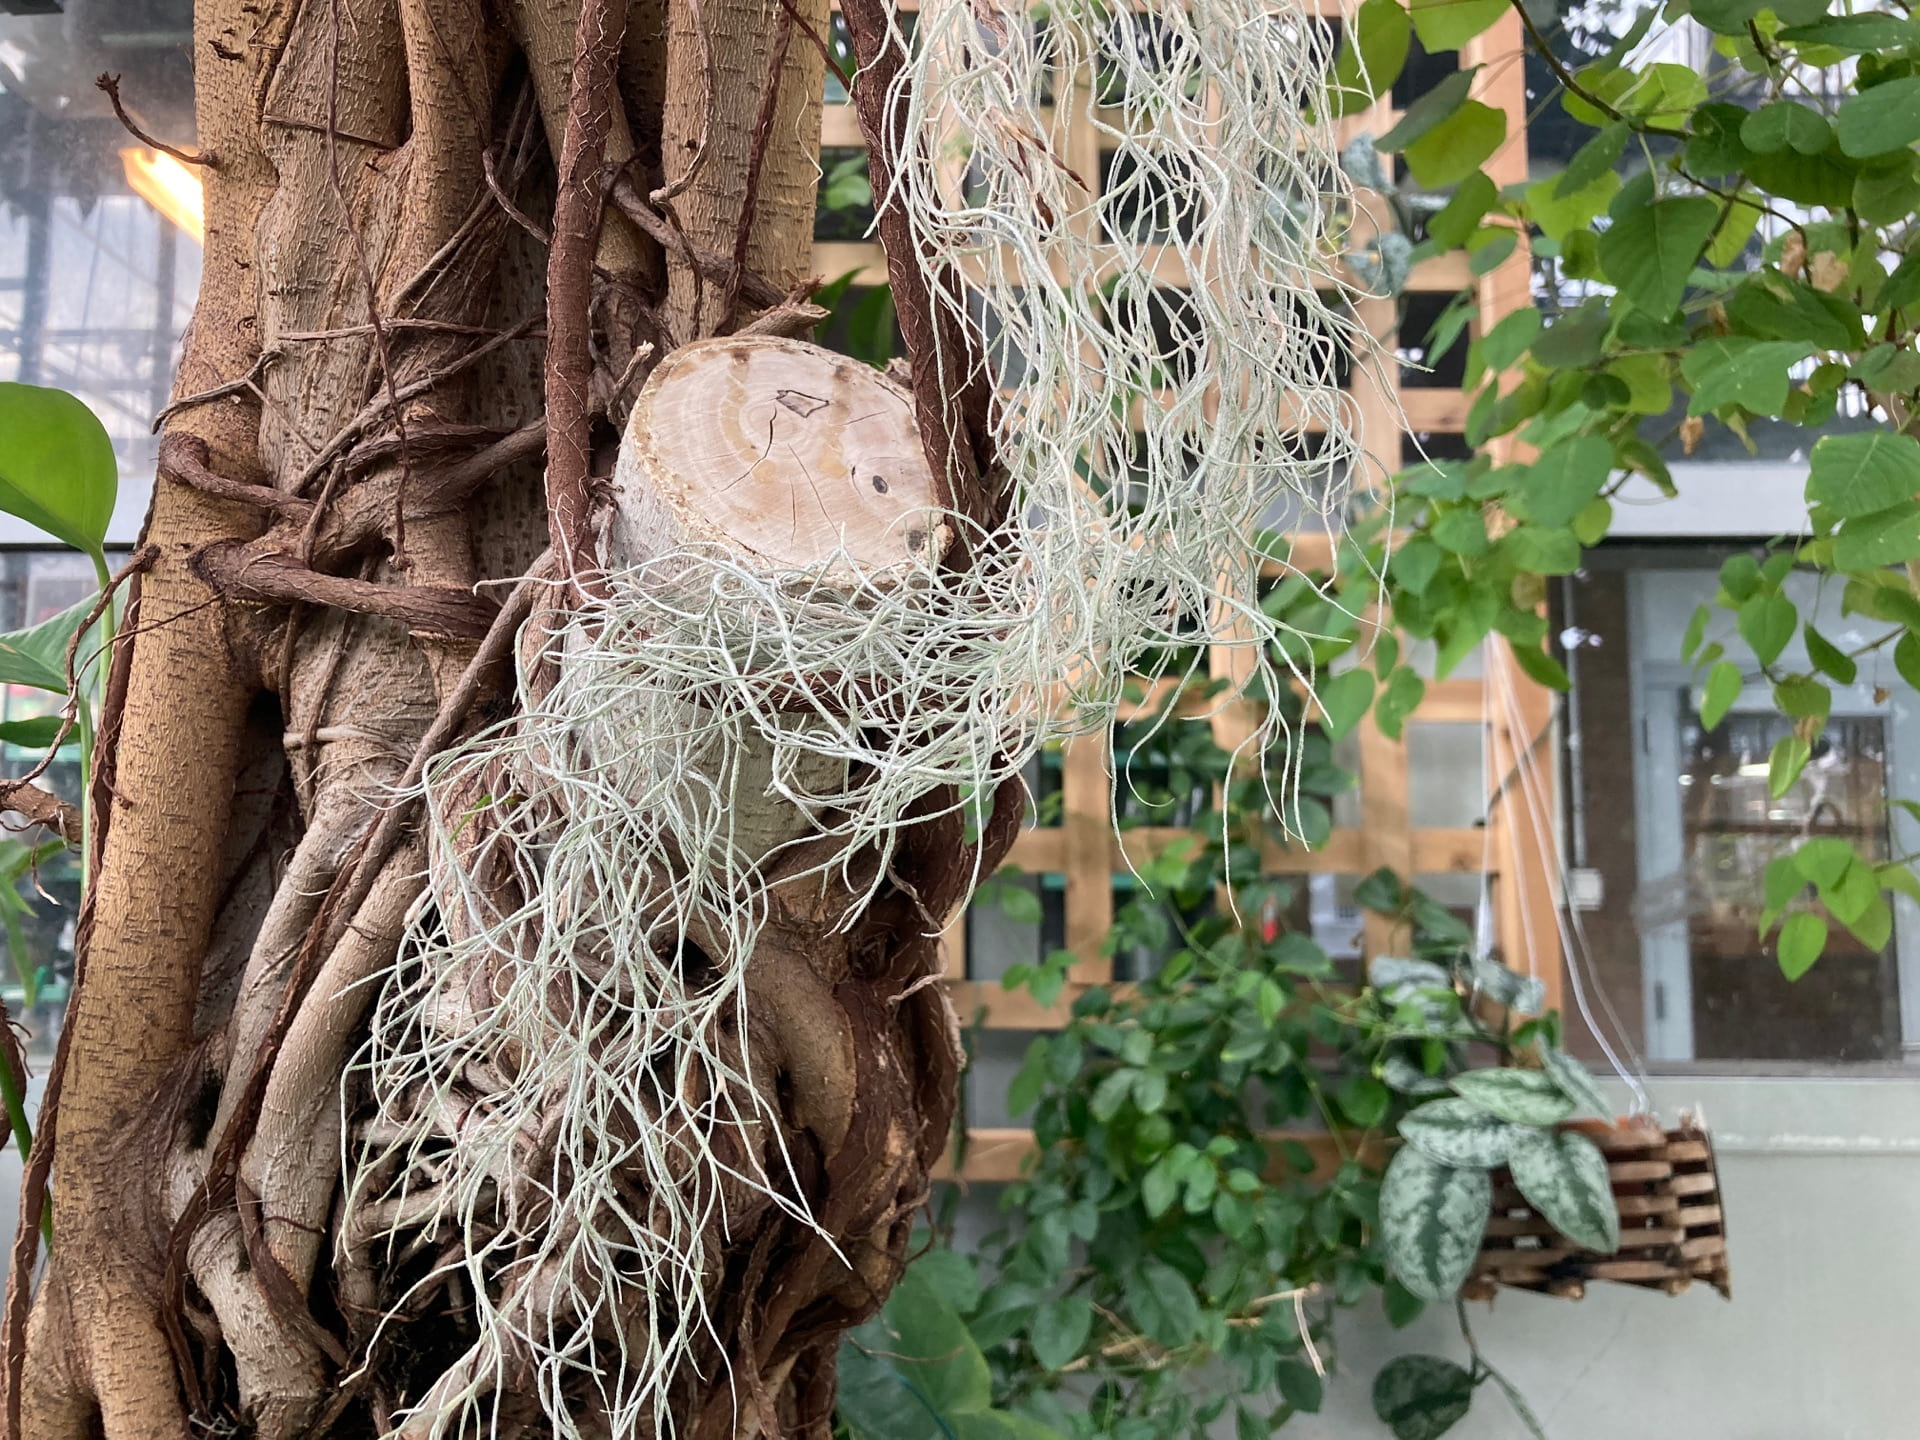 Tillandsia usneoides, Spanish moss, is a staple of the landscape in the American South. It is epiphytic and gets all of it's water and nutrients from the air and the morning dew.